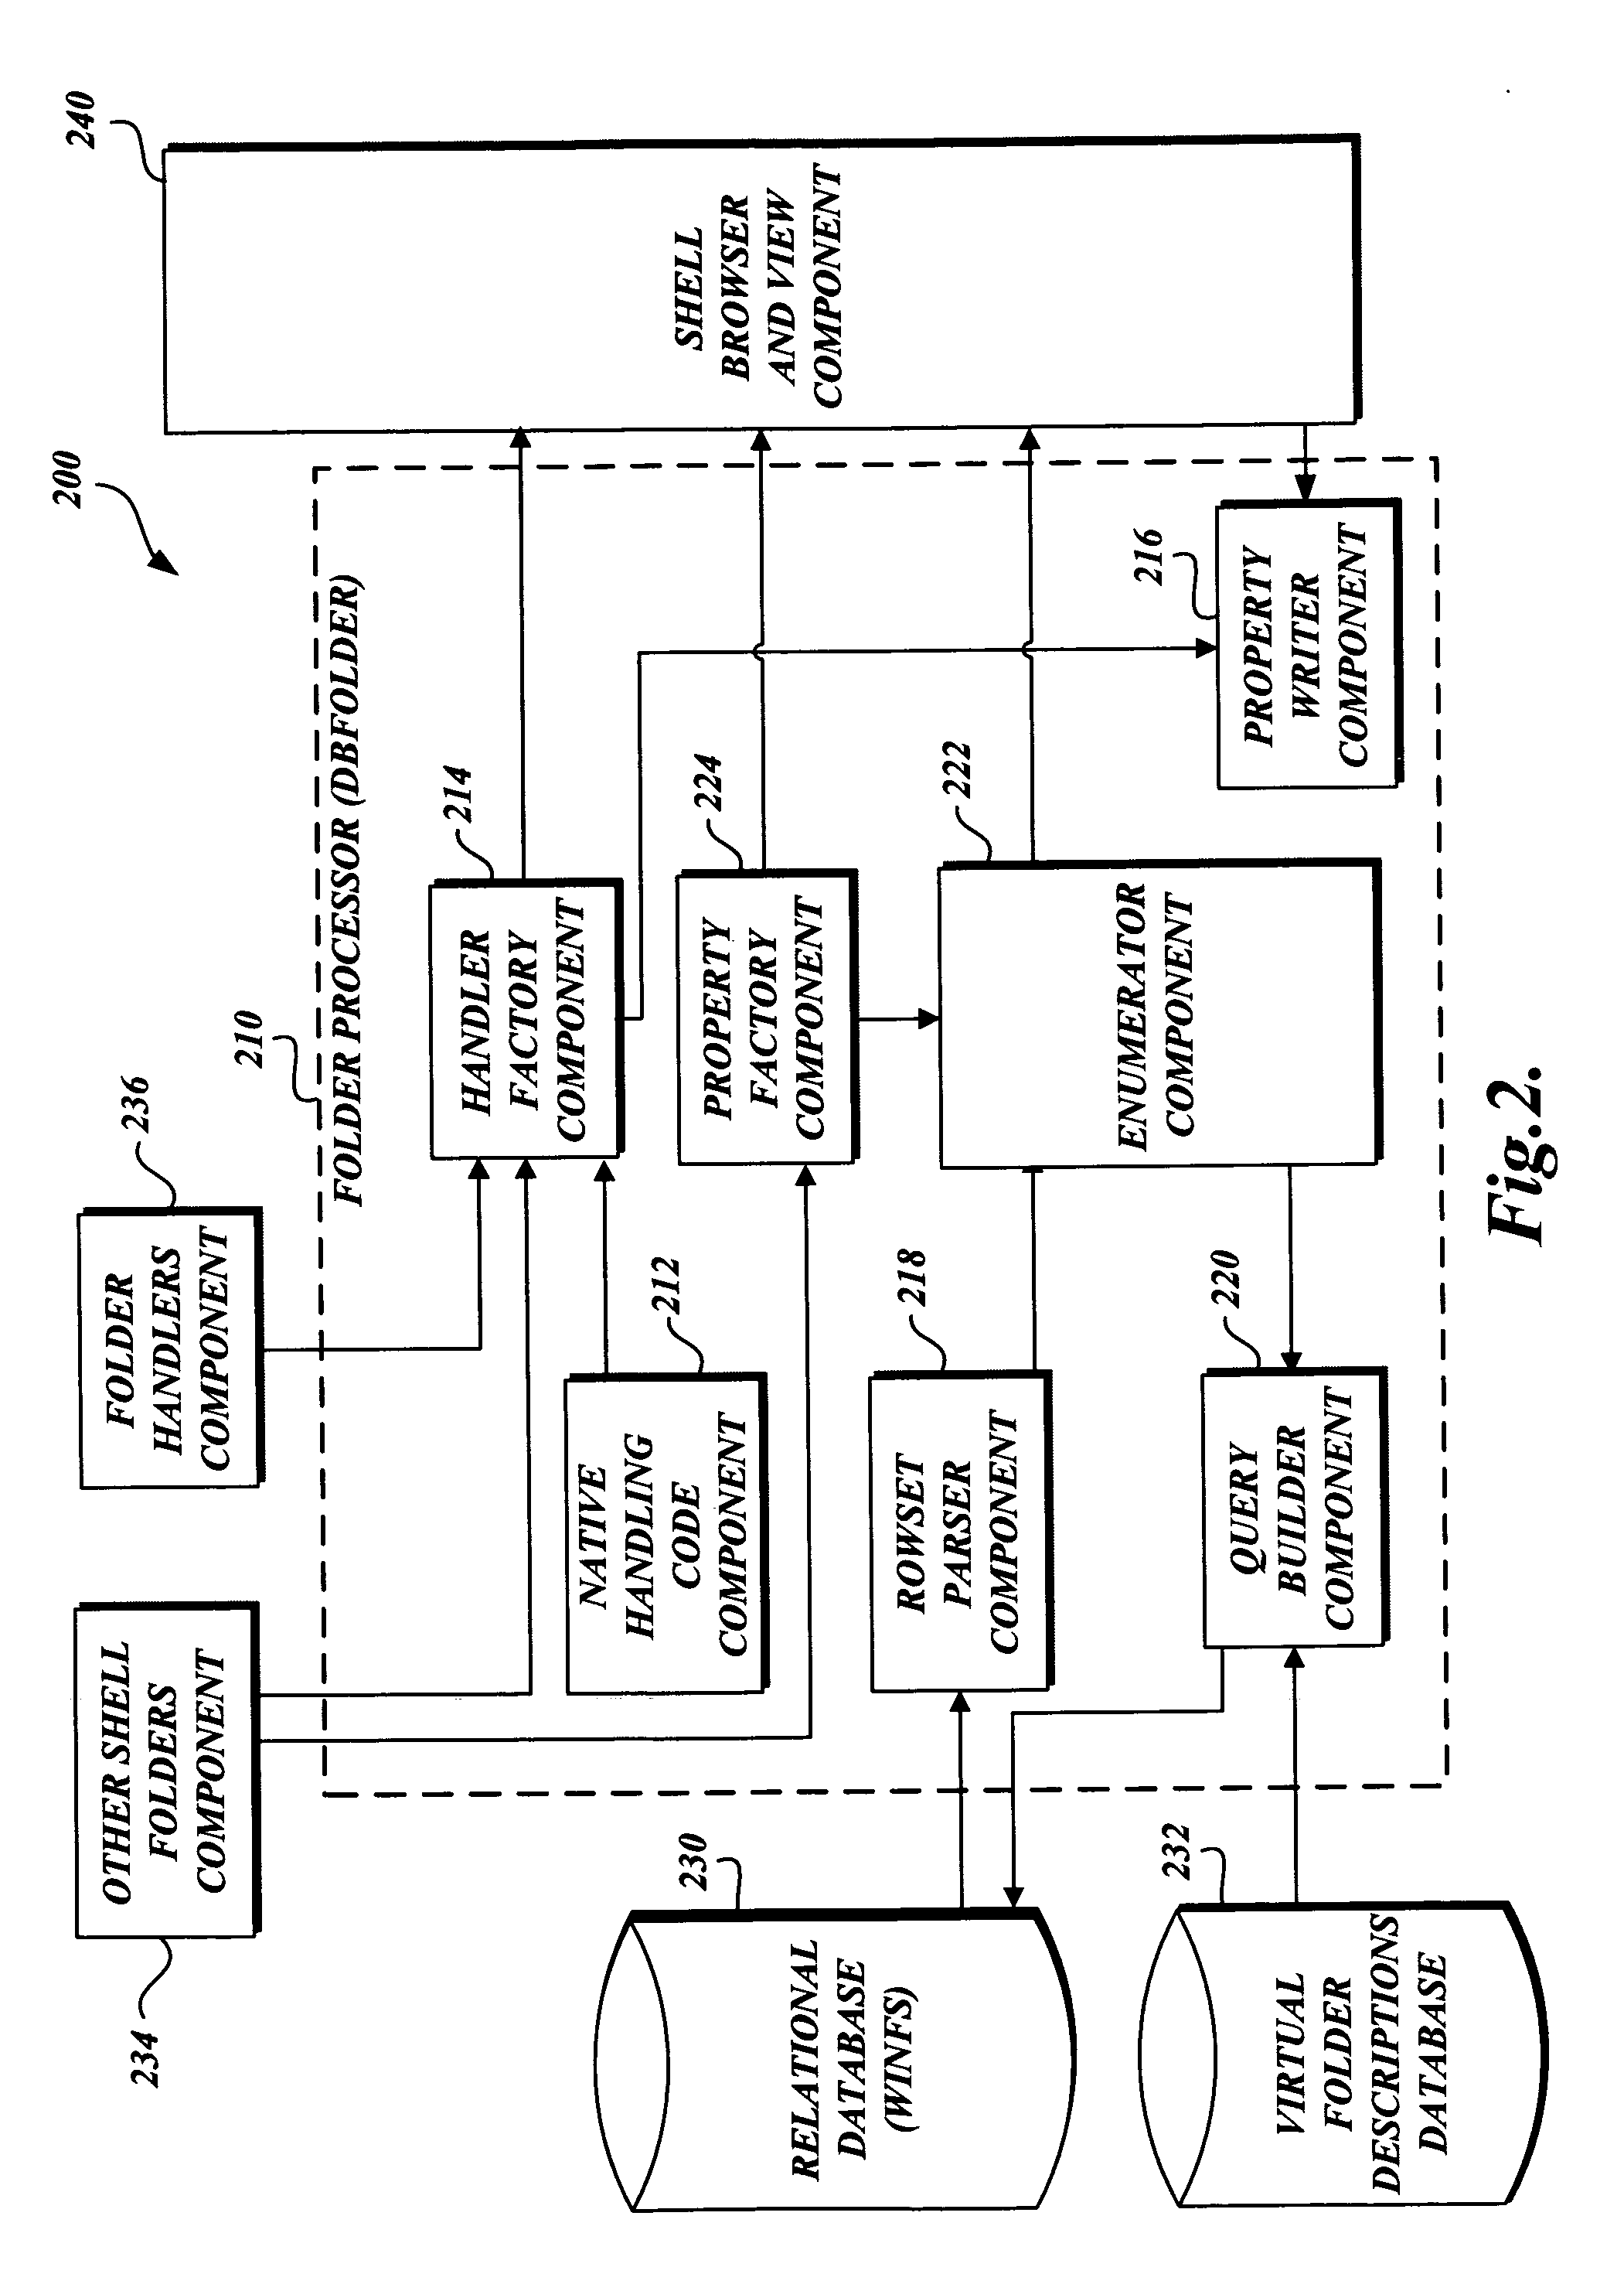 System and method for filtering and organizing items based on common elements